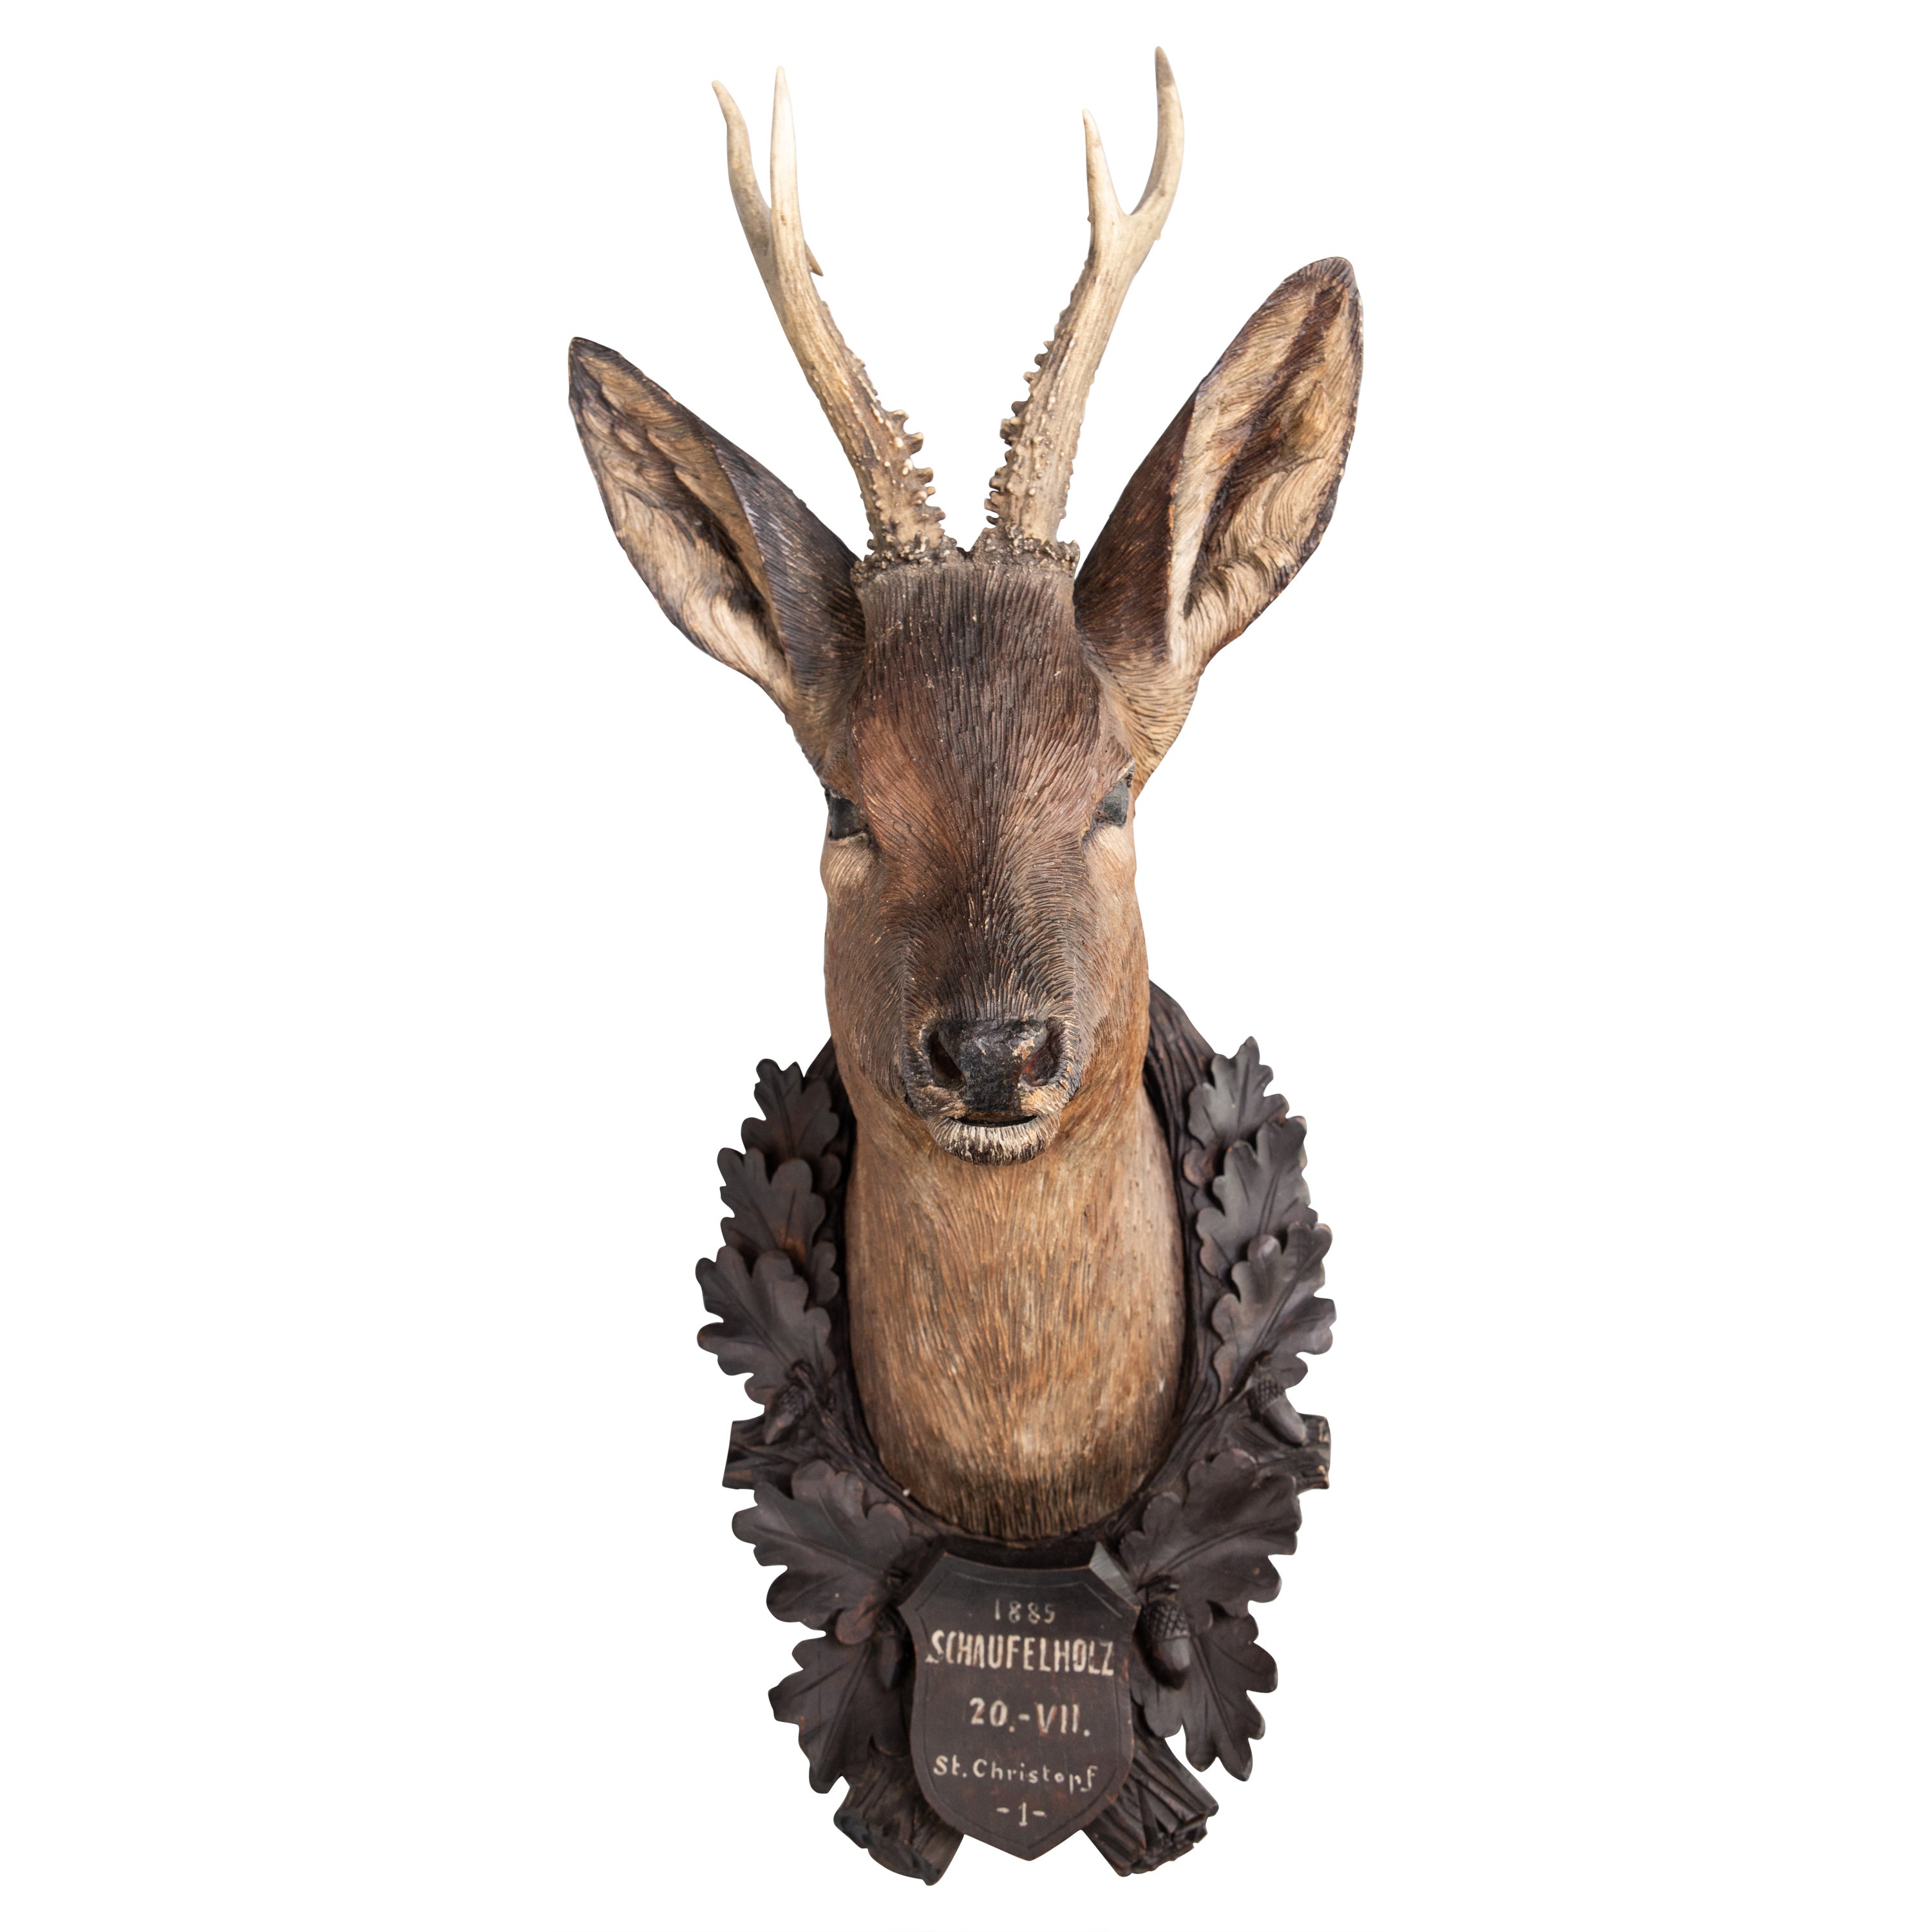 Black Forest Carved Stag Deer Head With Real Antlers Trophy Mount Plaque 1885